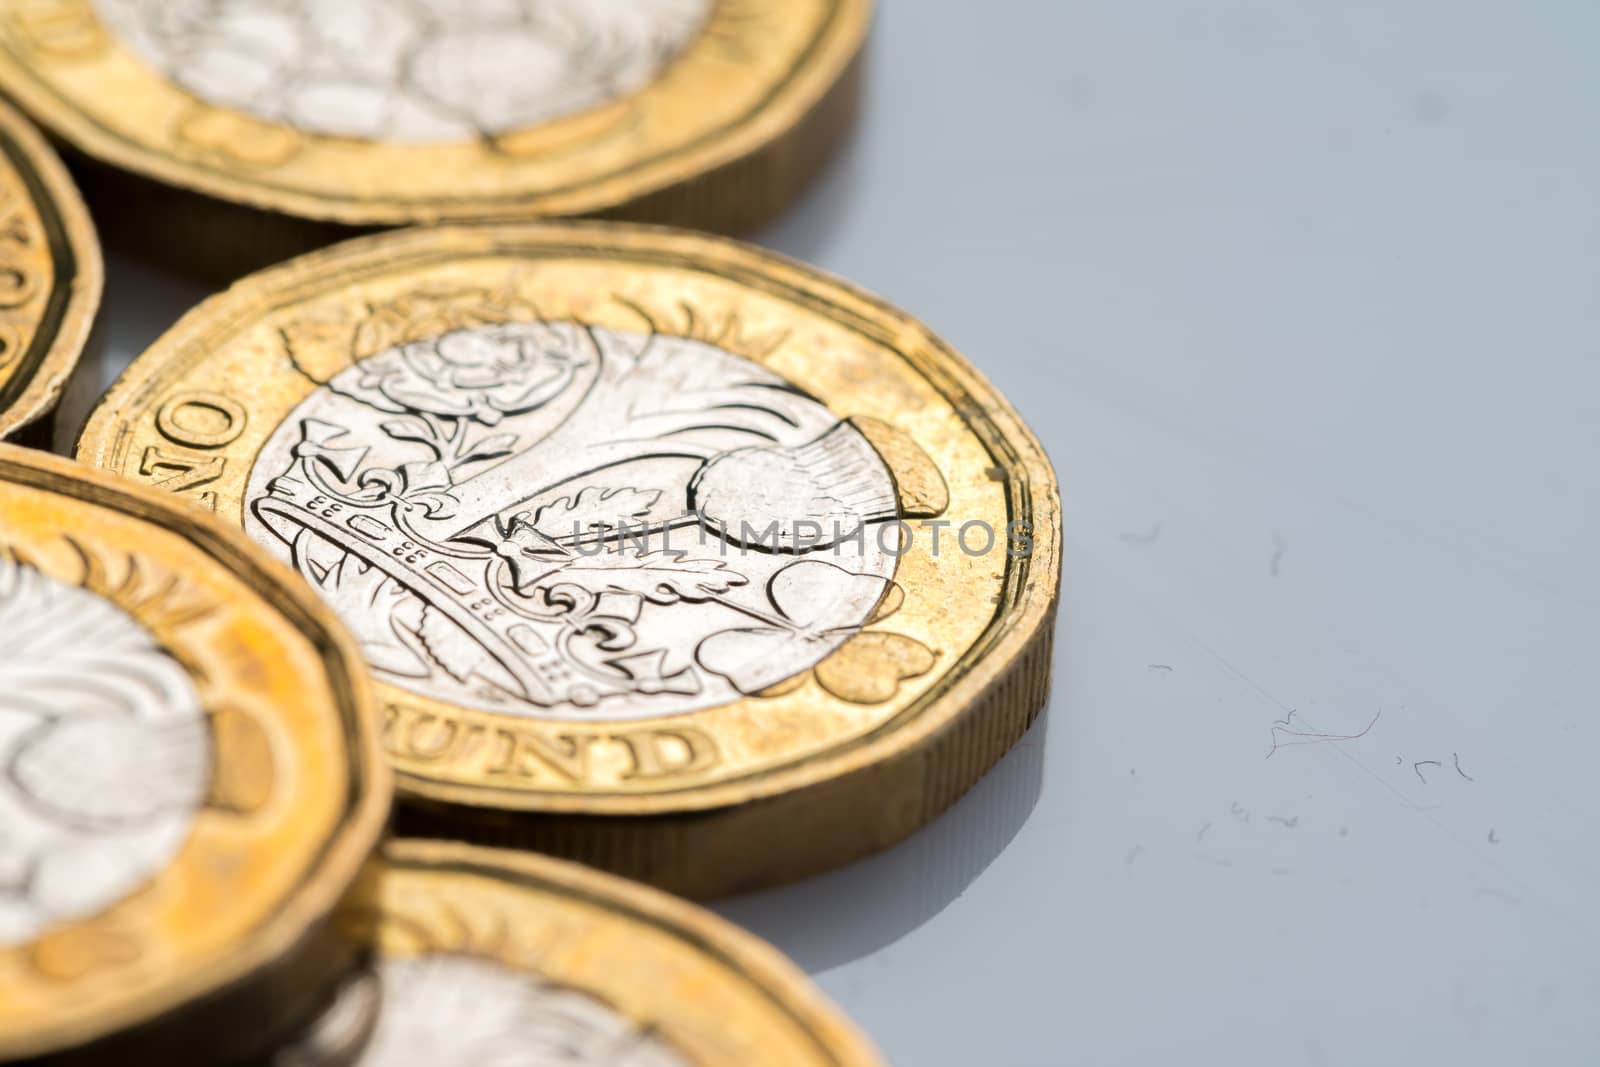 New British one pound coin in studio by Alicephoto